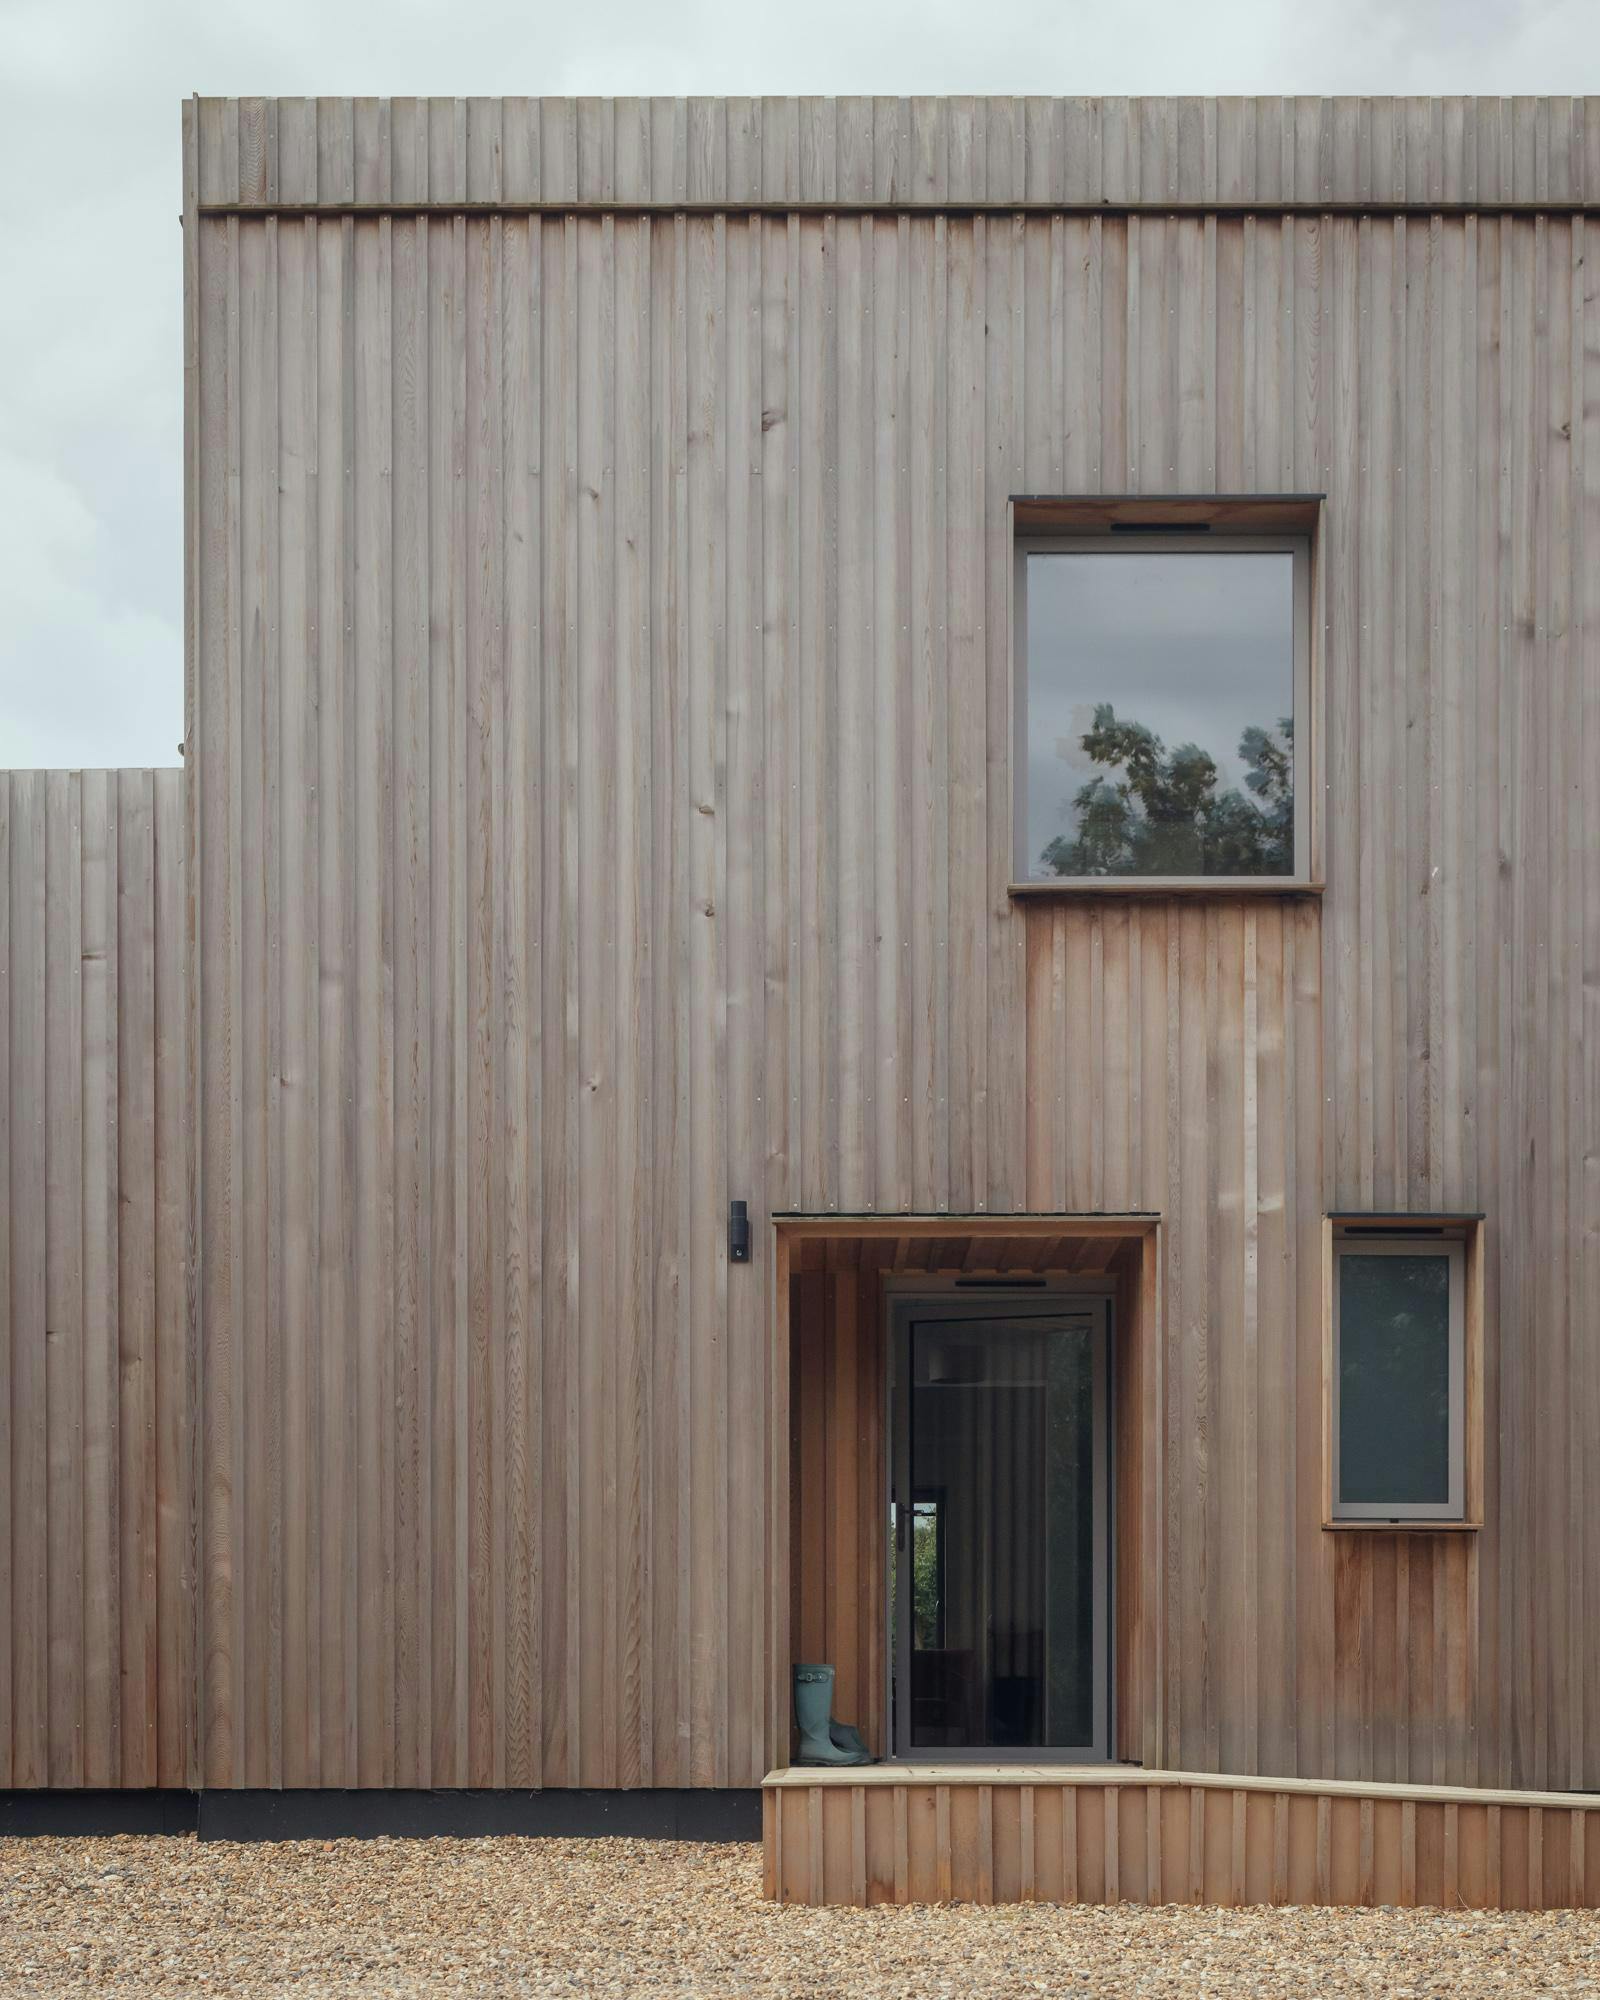 Entrance to contemporary timber clad home by Studio Bark